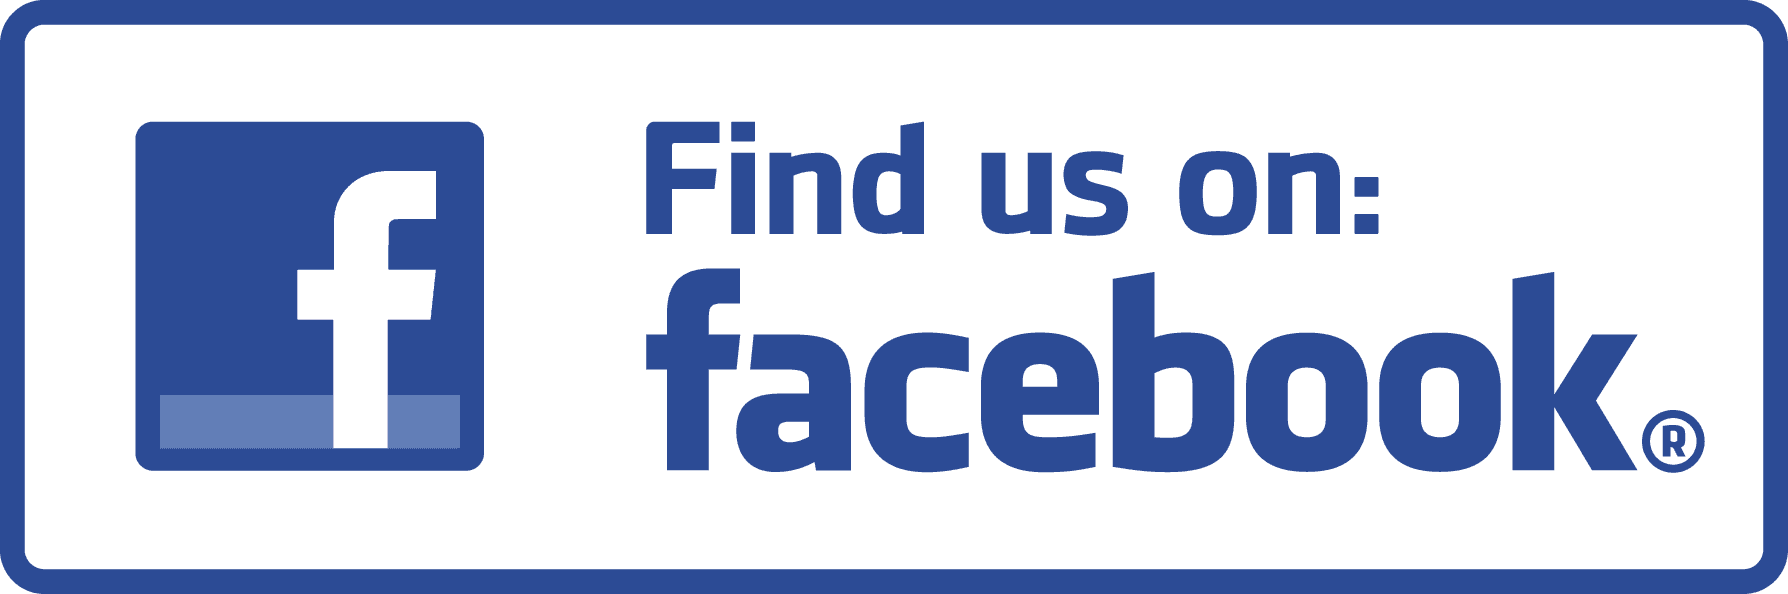 Find The Garage Door & Gate Automation Company on Facebook